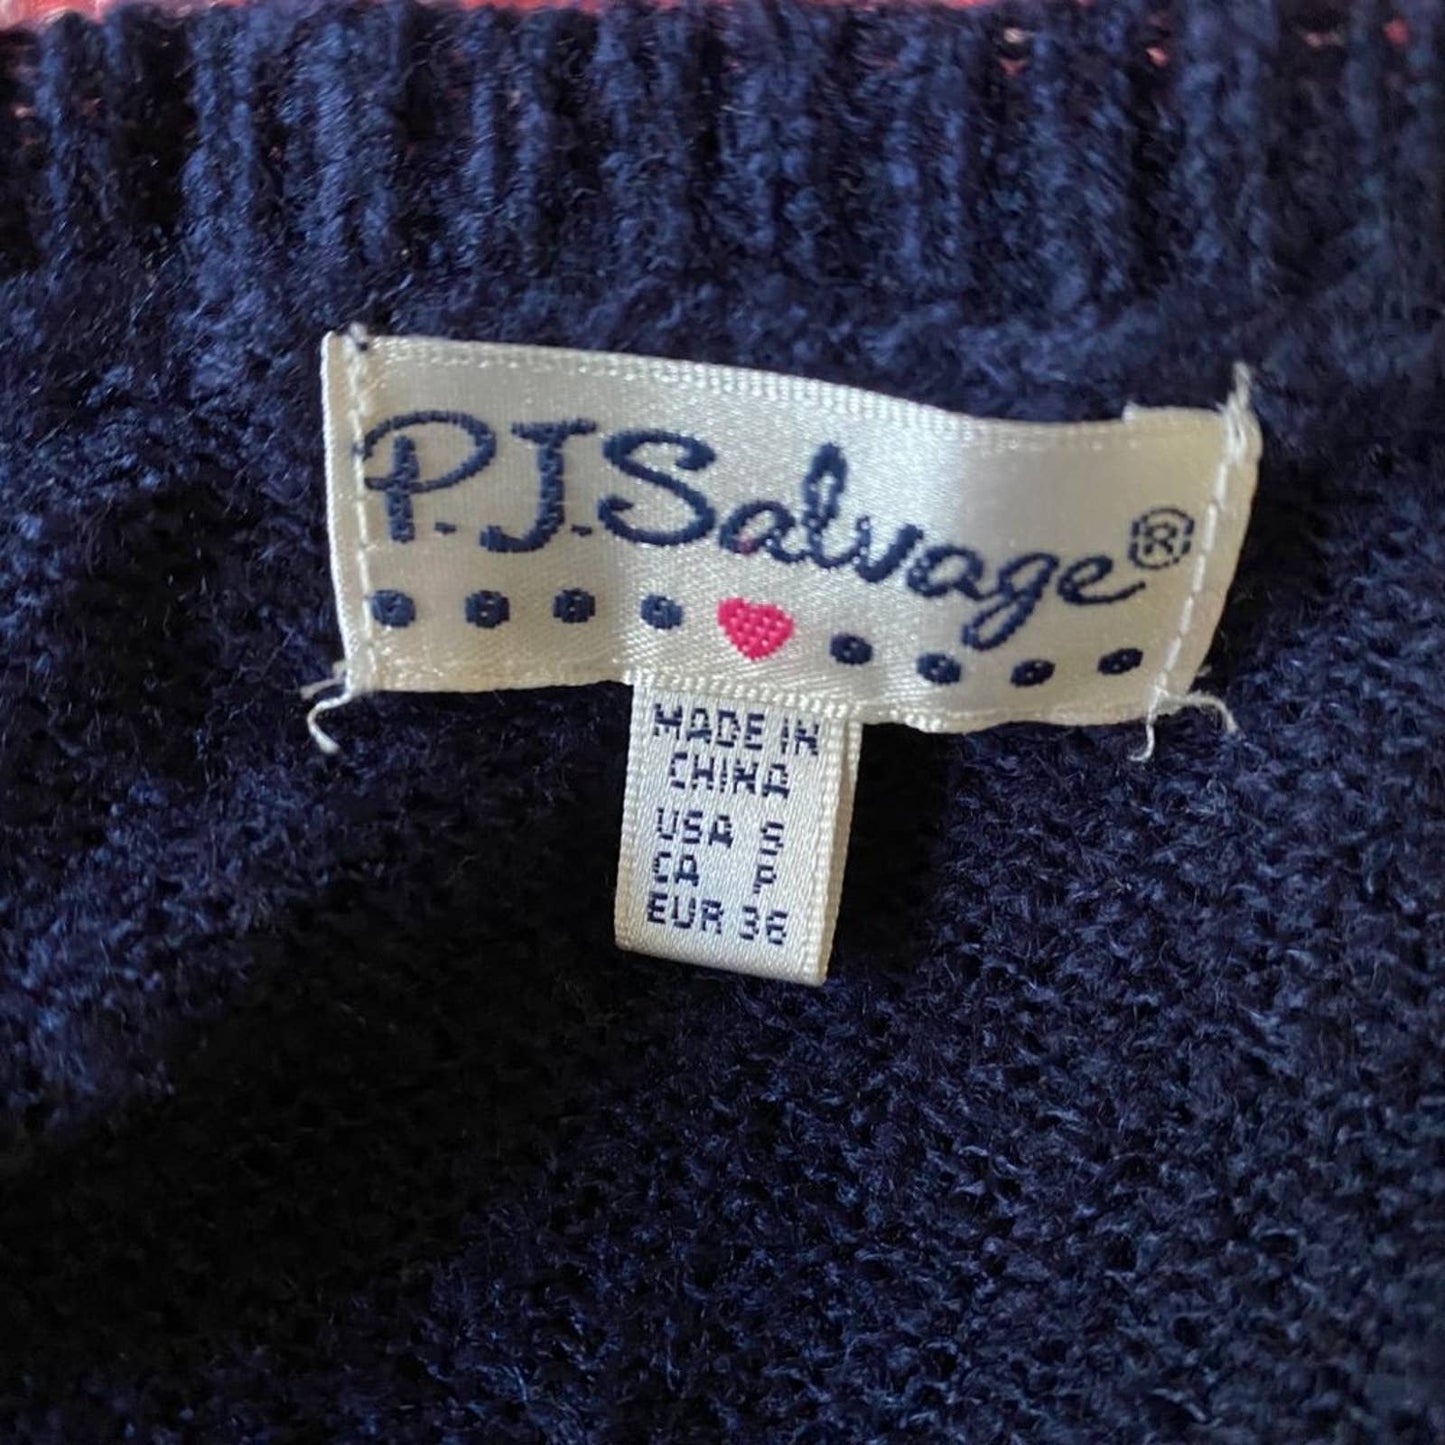 P J Salvage sz S Queen of hearts sweater NWT